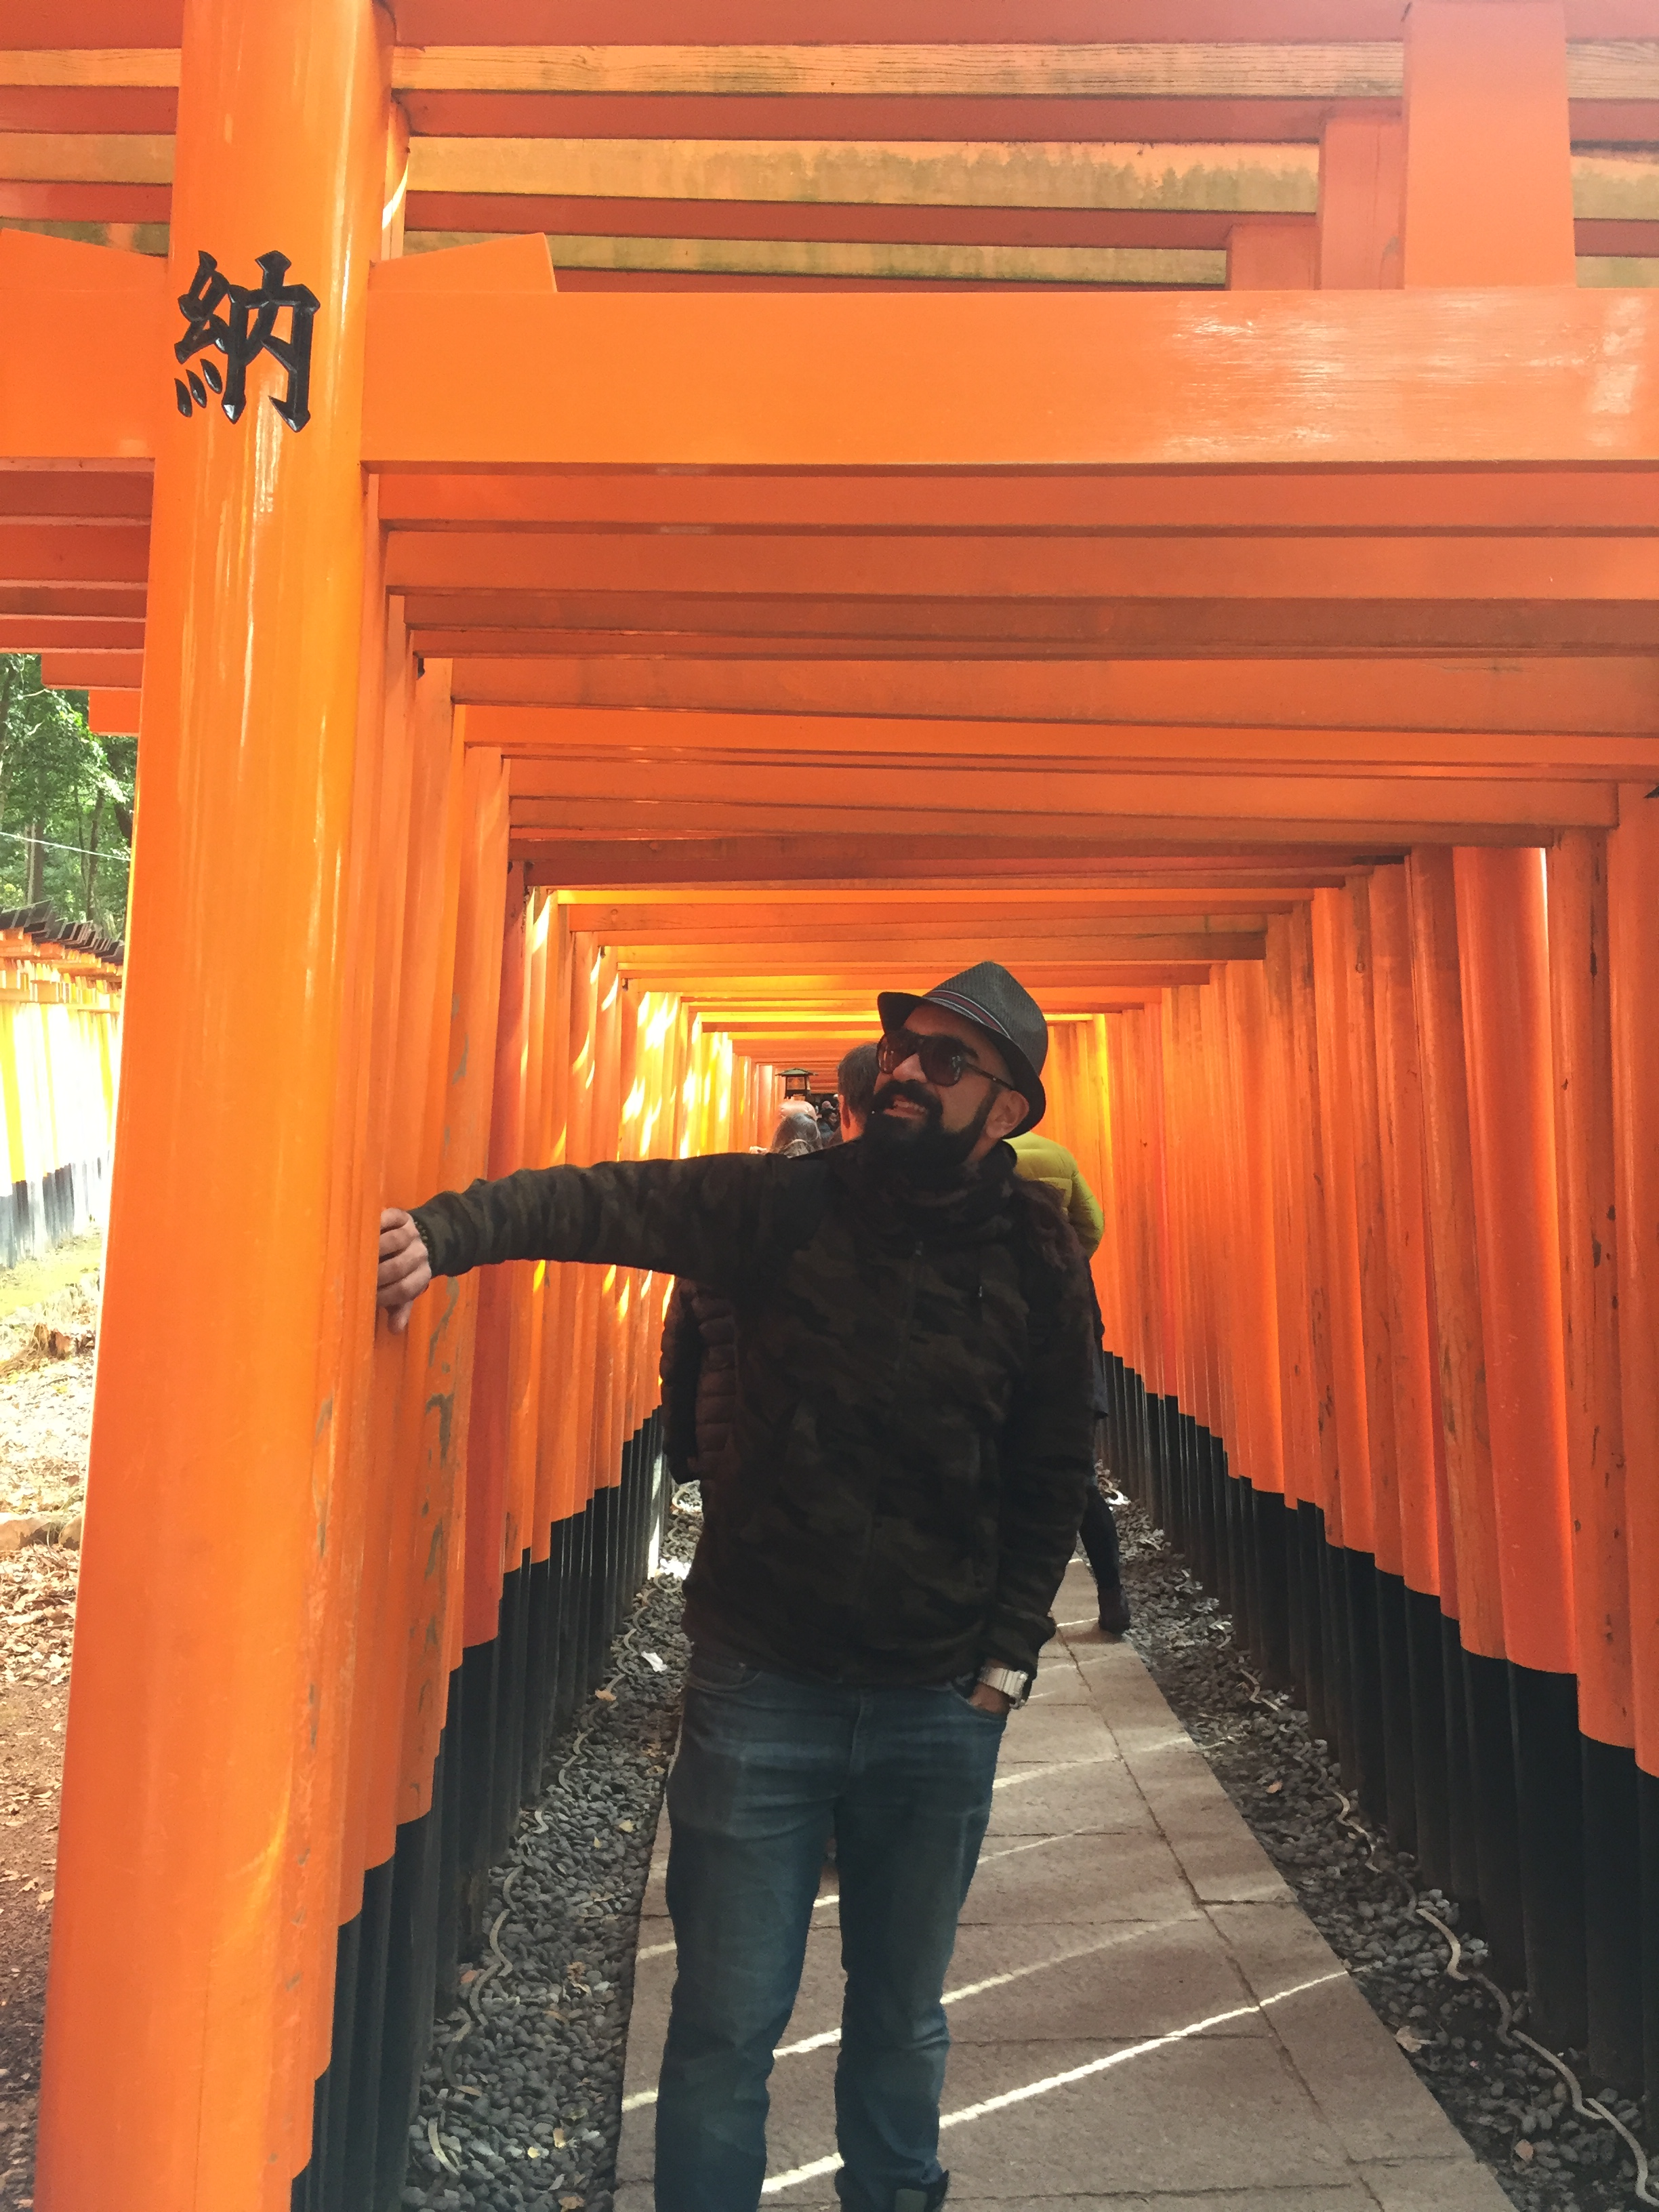 Ahmad Nemer enjoyed the sites of Japan during his experience in the country of Japan.